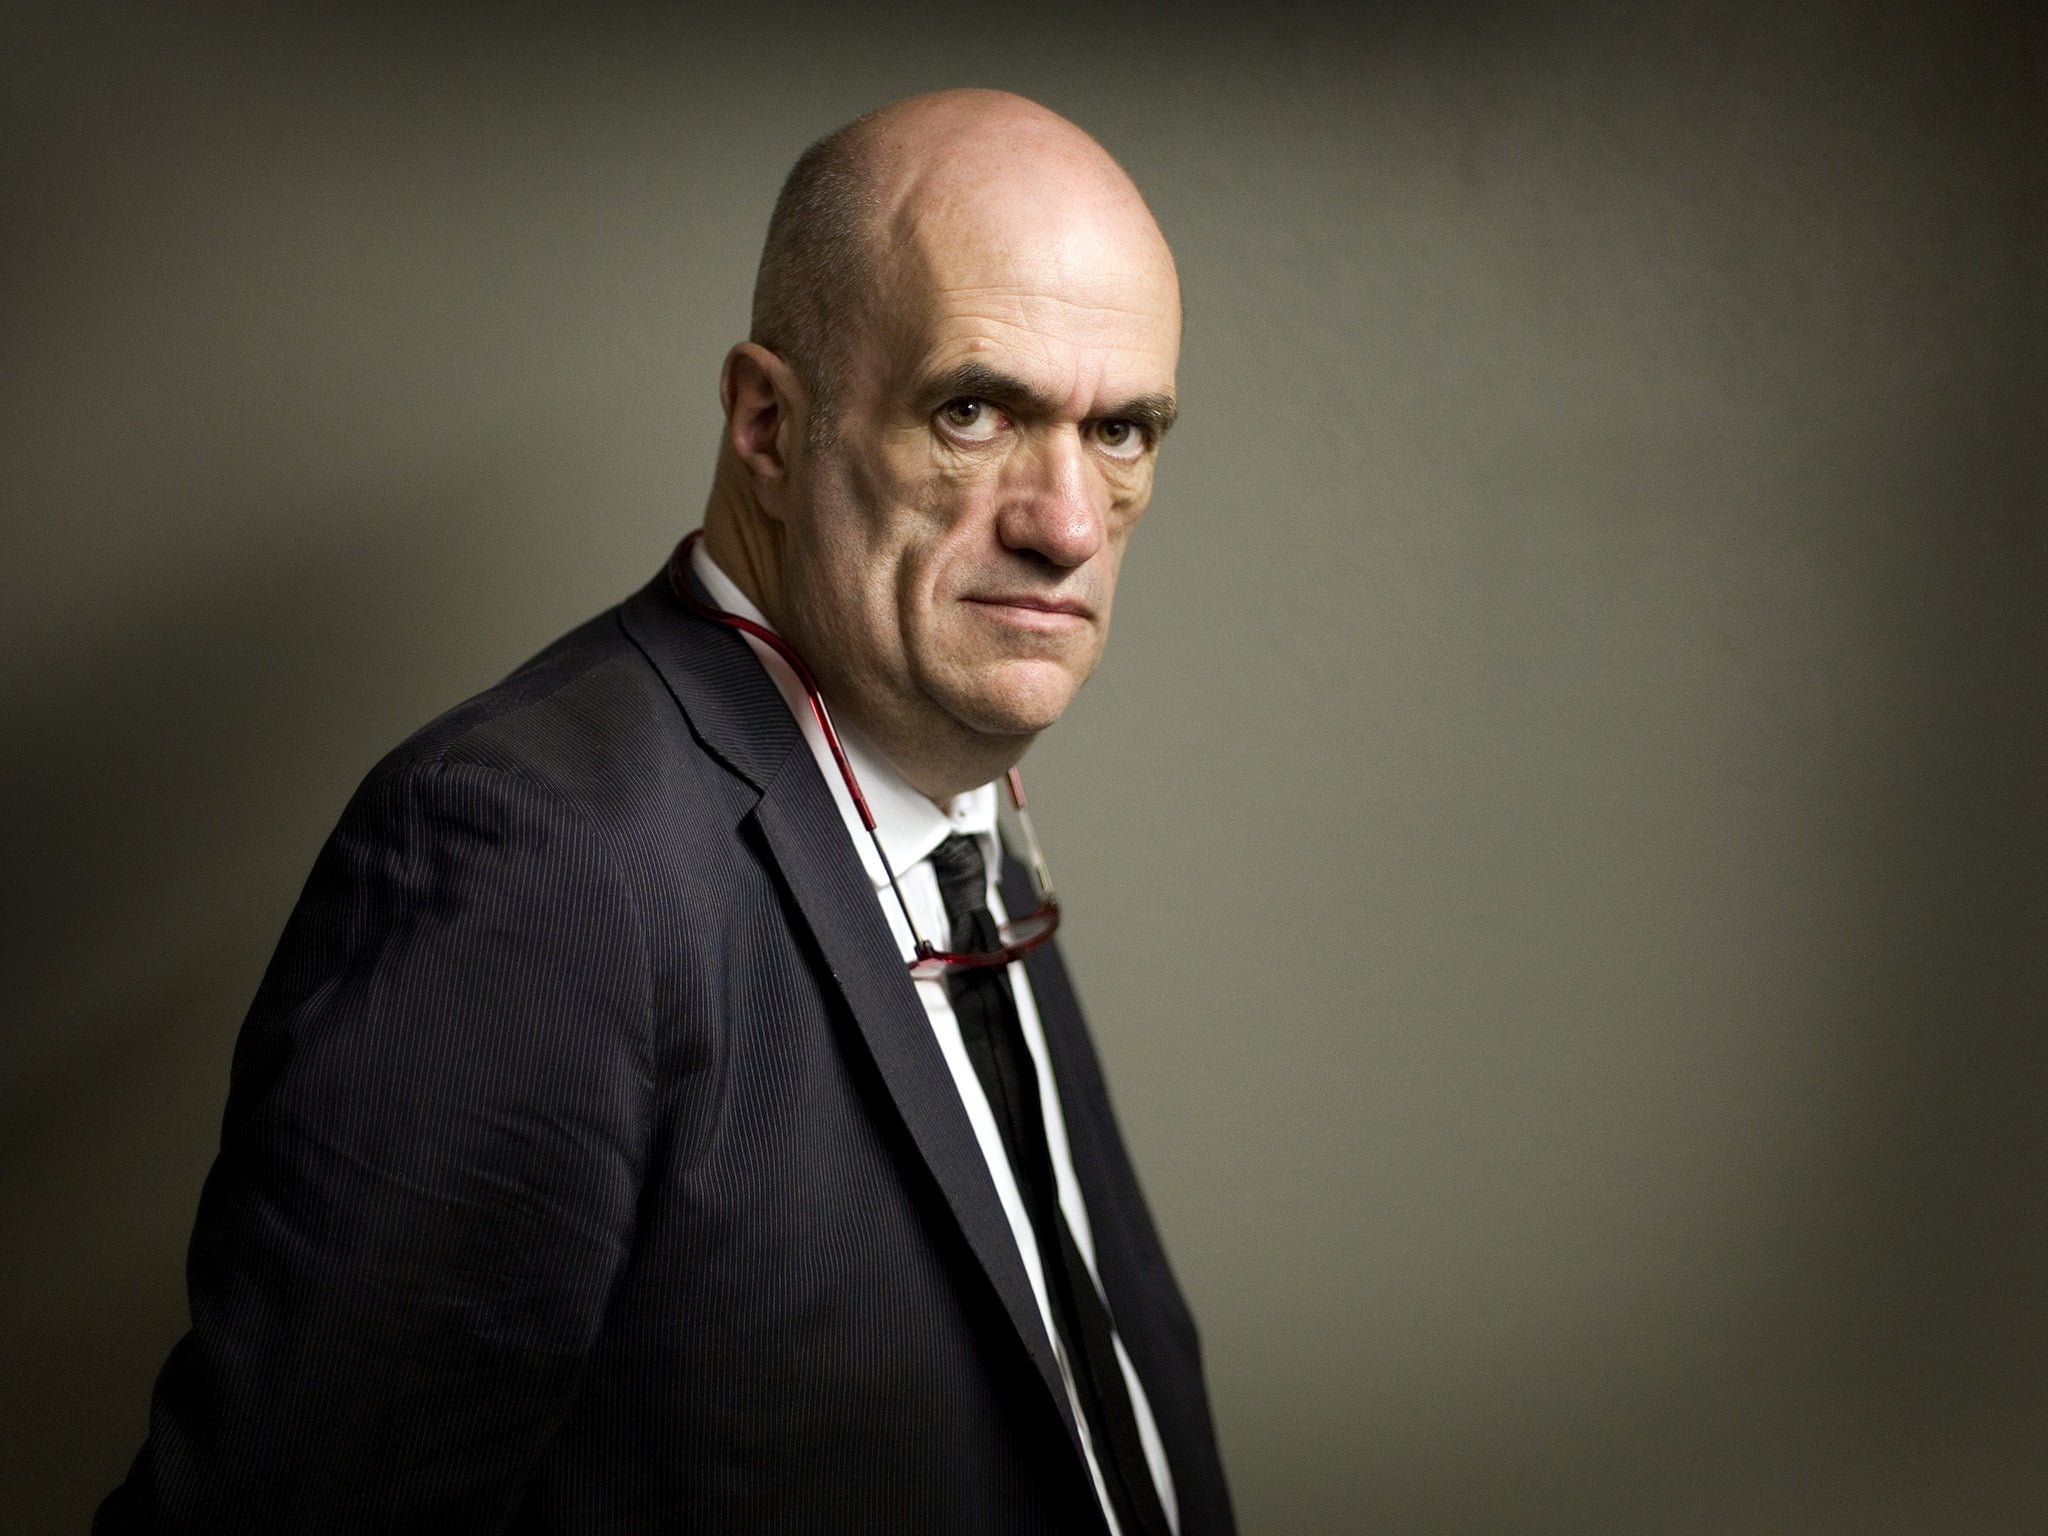 Colm Toibin in Auckland, New Zealand